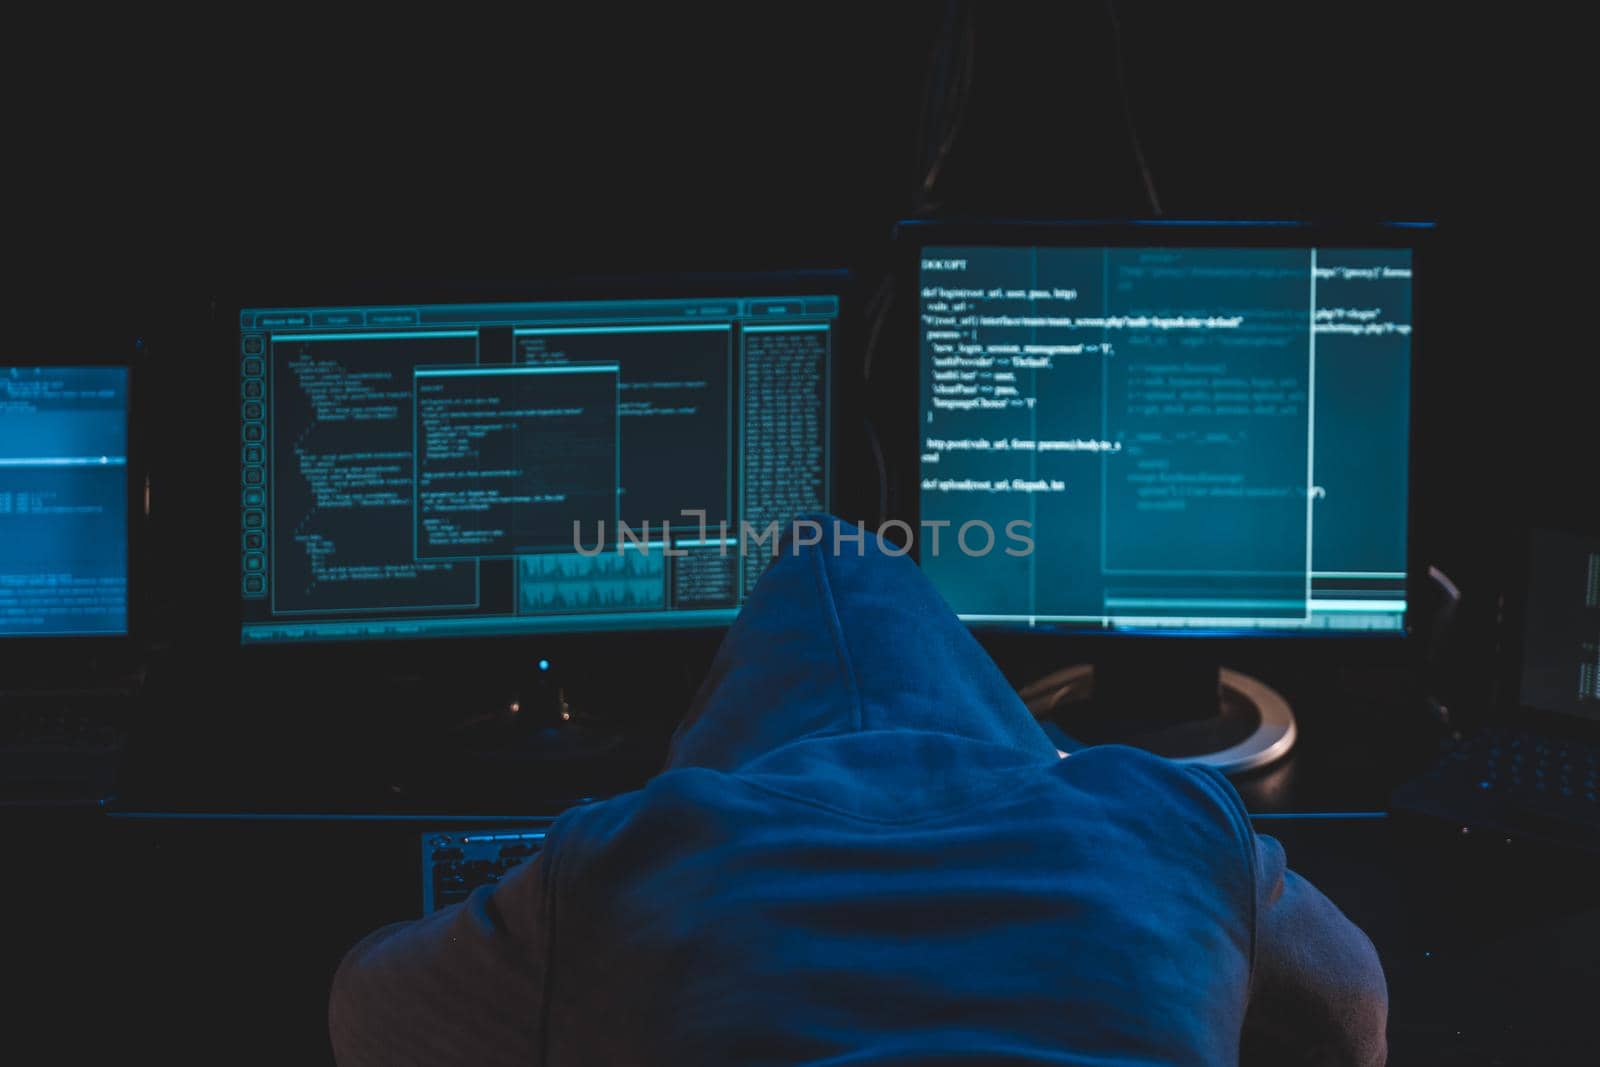 Overworked tired hacker. hooded hacker sleeping at his computer, malicious code software on the screen hacking data center by igor010